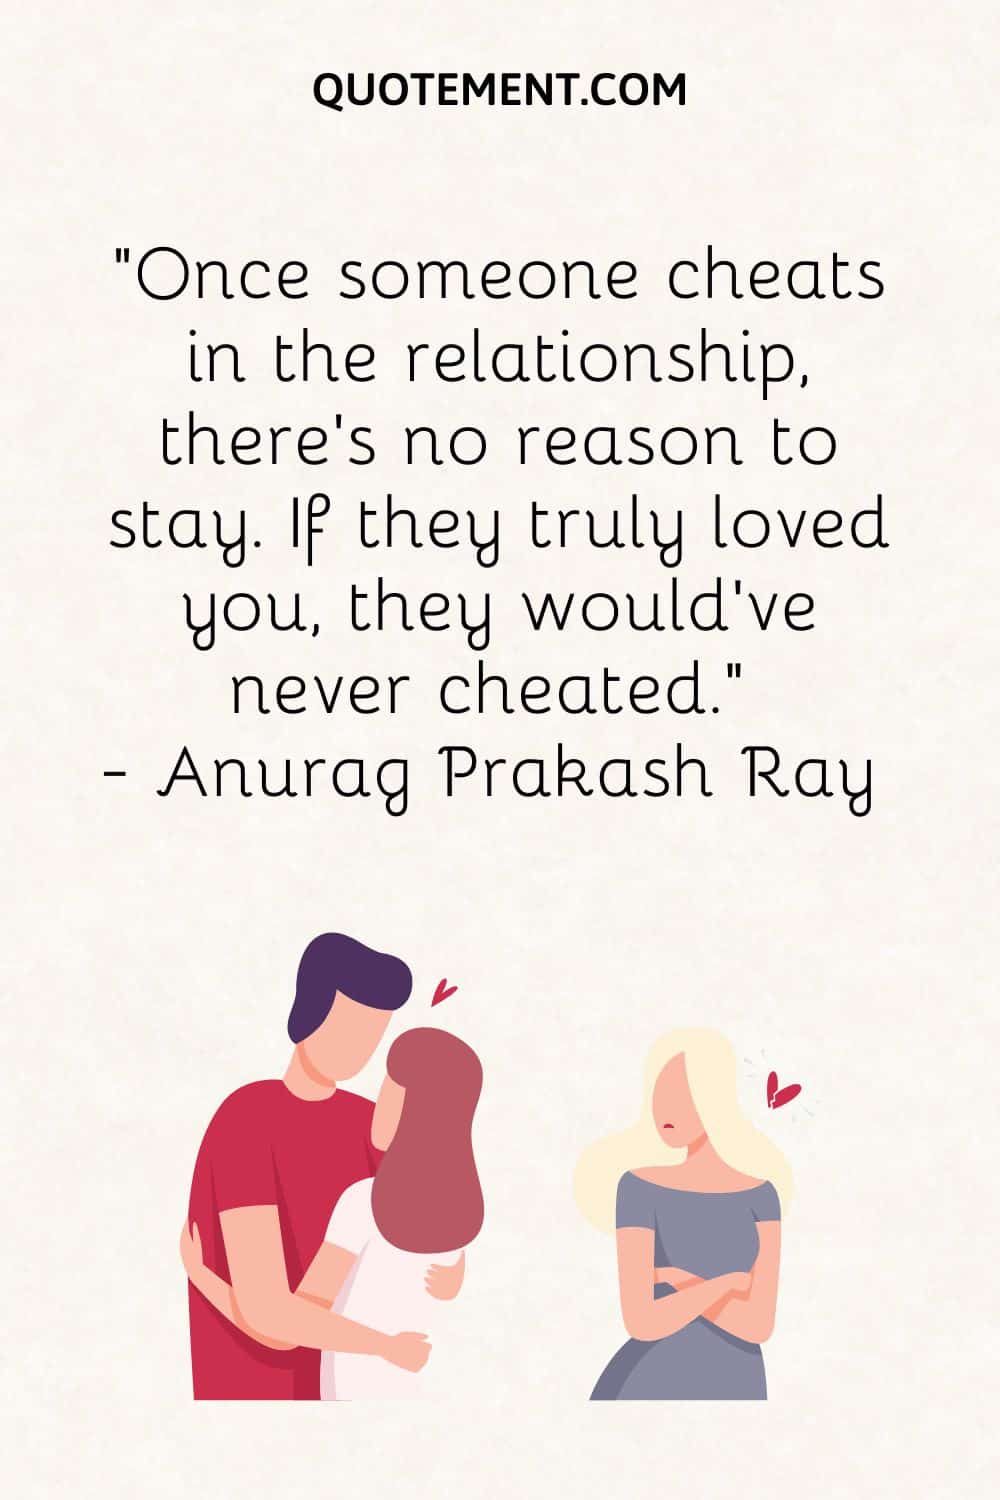 Once someone cheats in the relationship, there’s no reason to stay. If they truly loved you, they would’ve never cheated